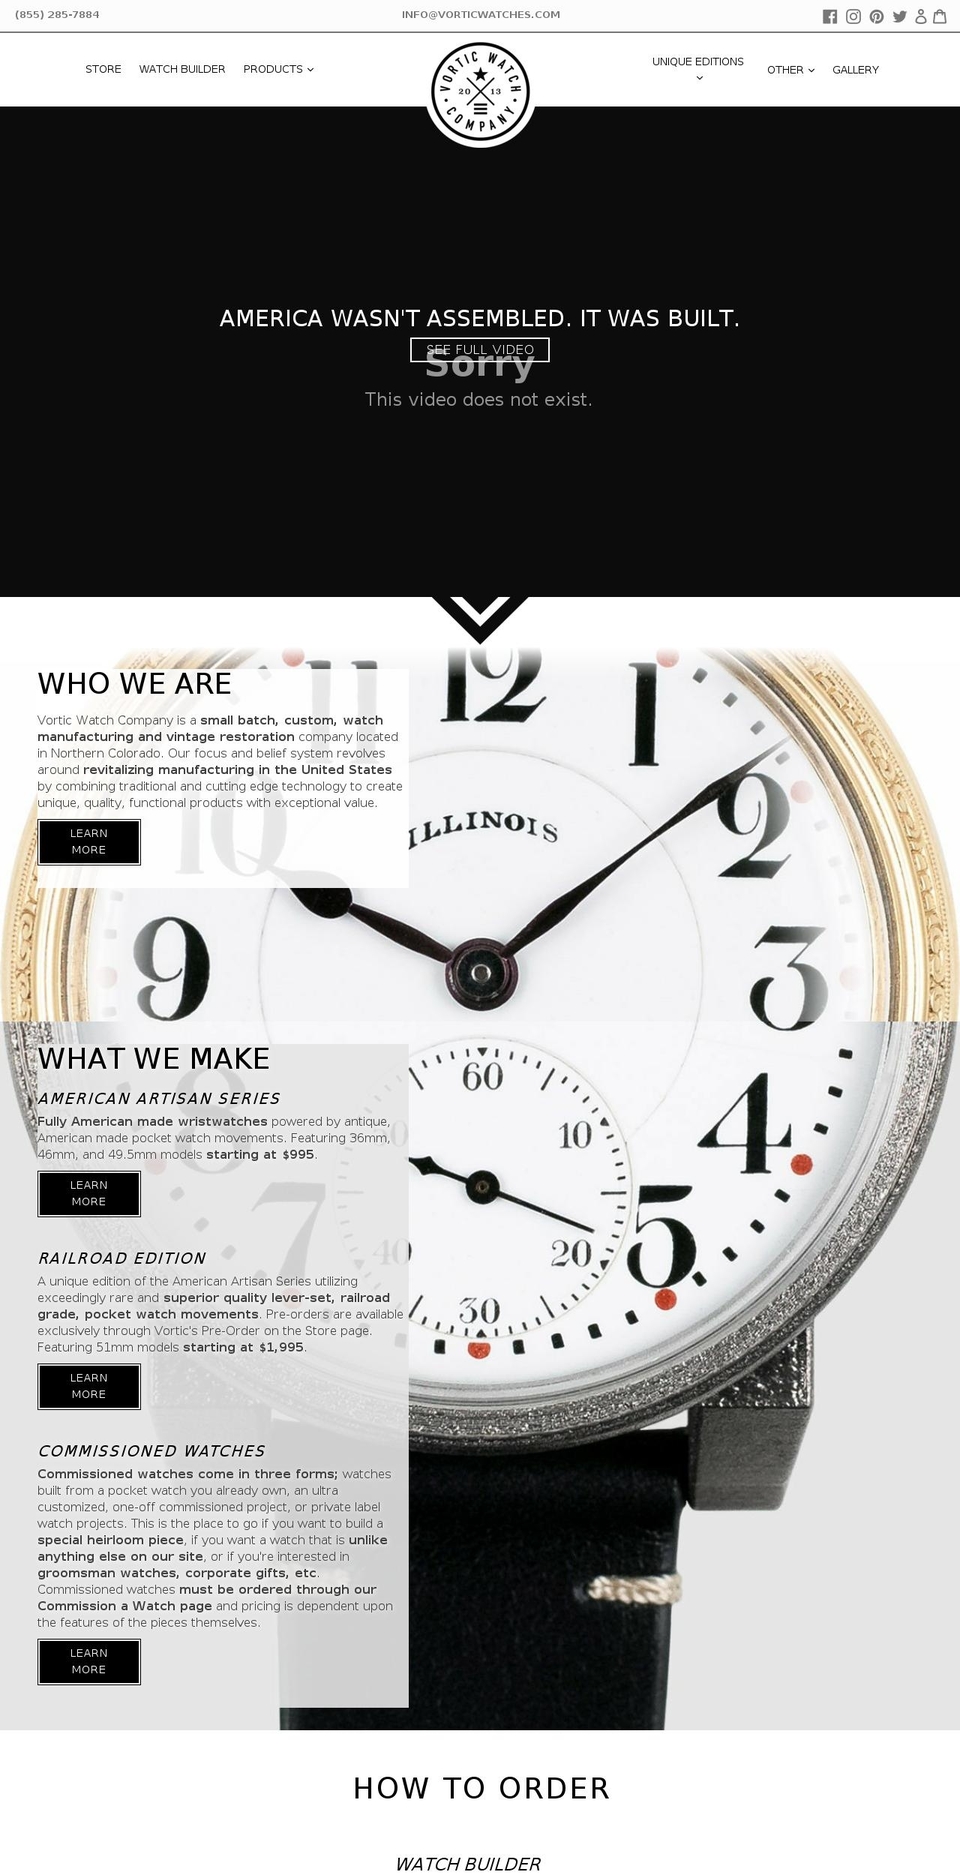 Live Site Shopify theme site example vorticwatches.us